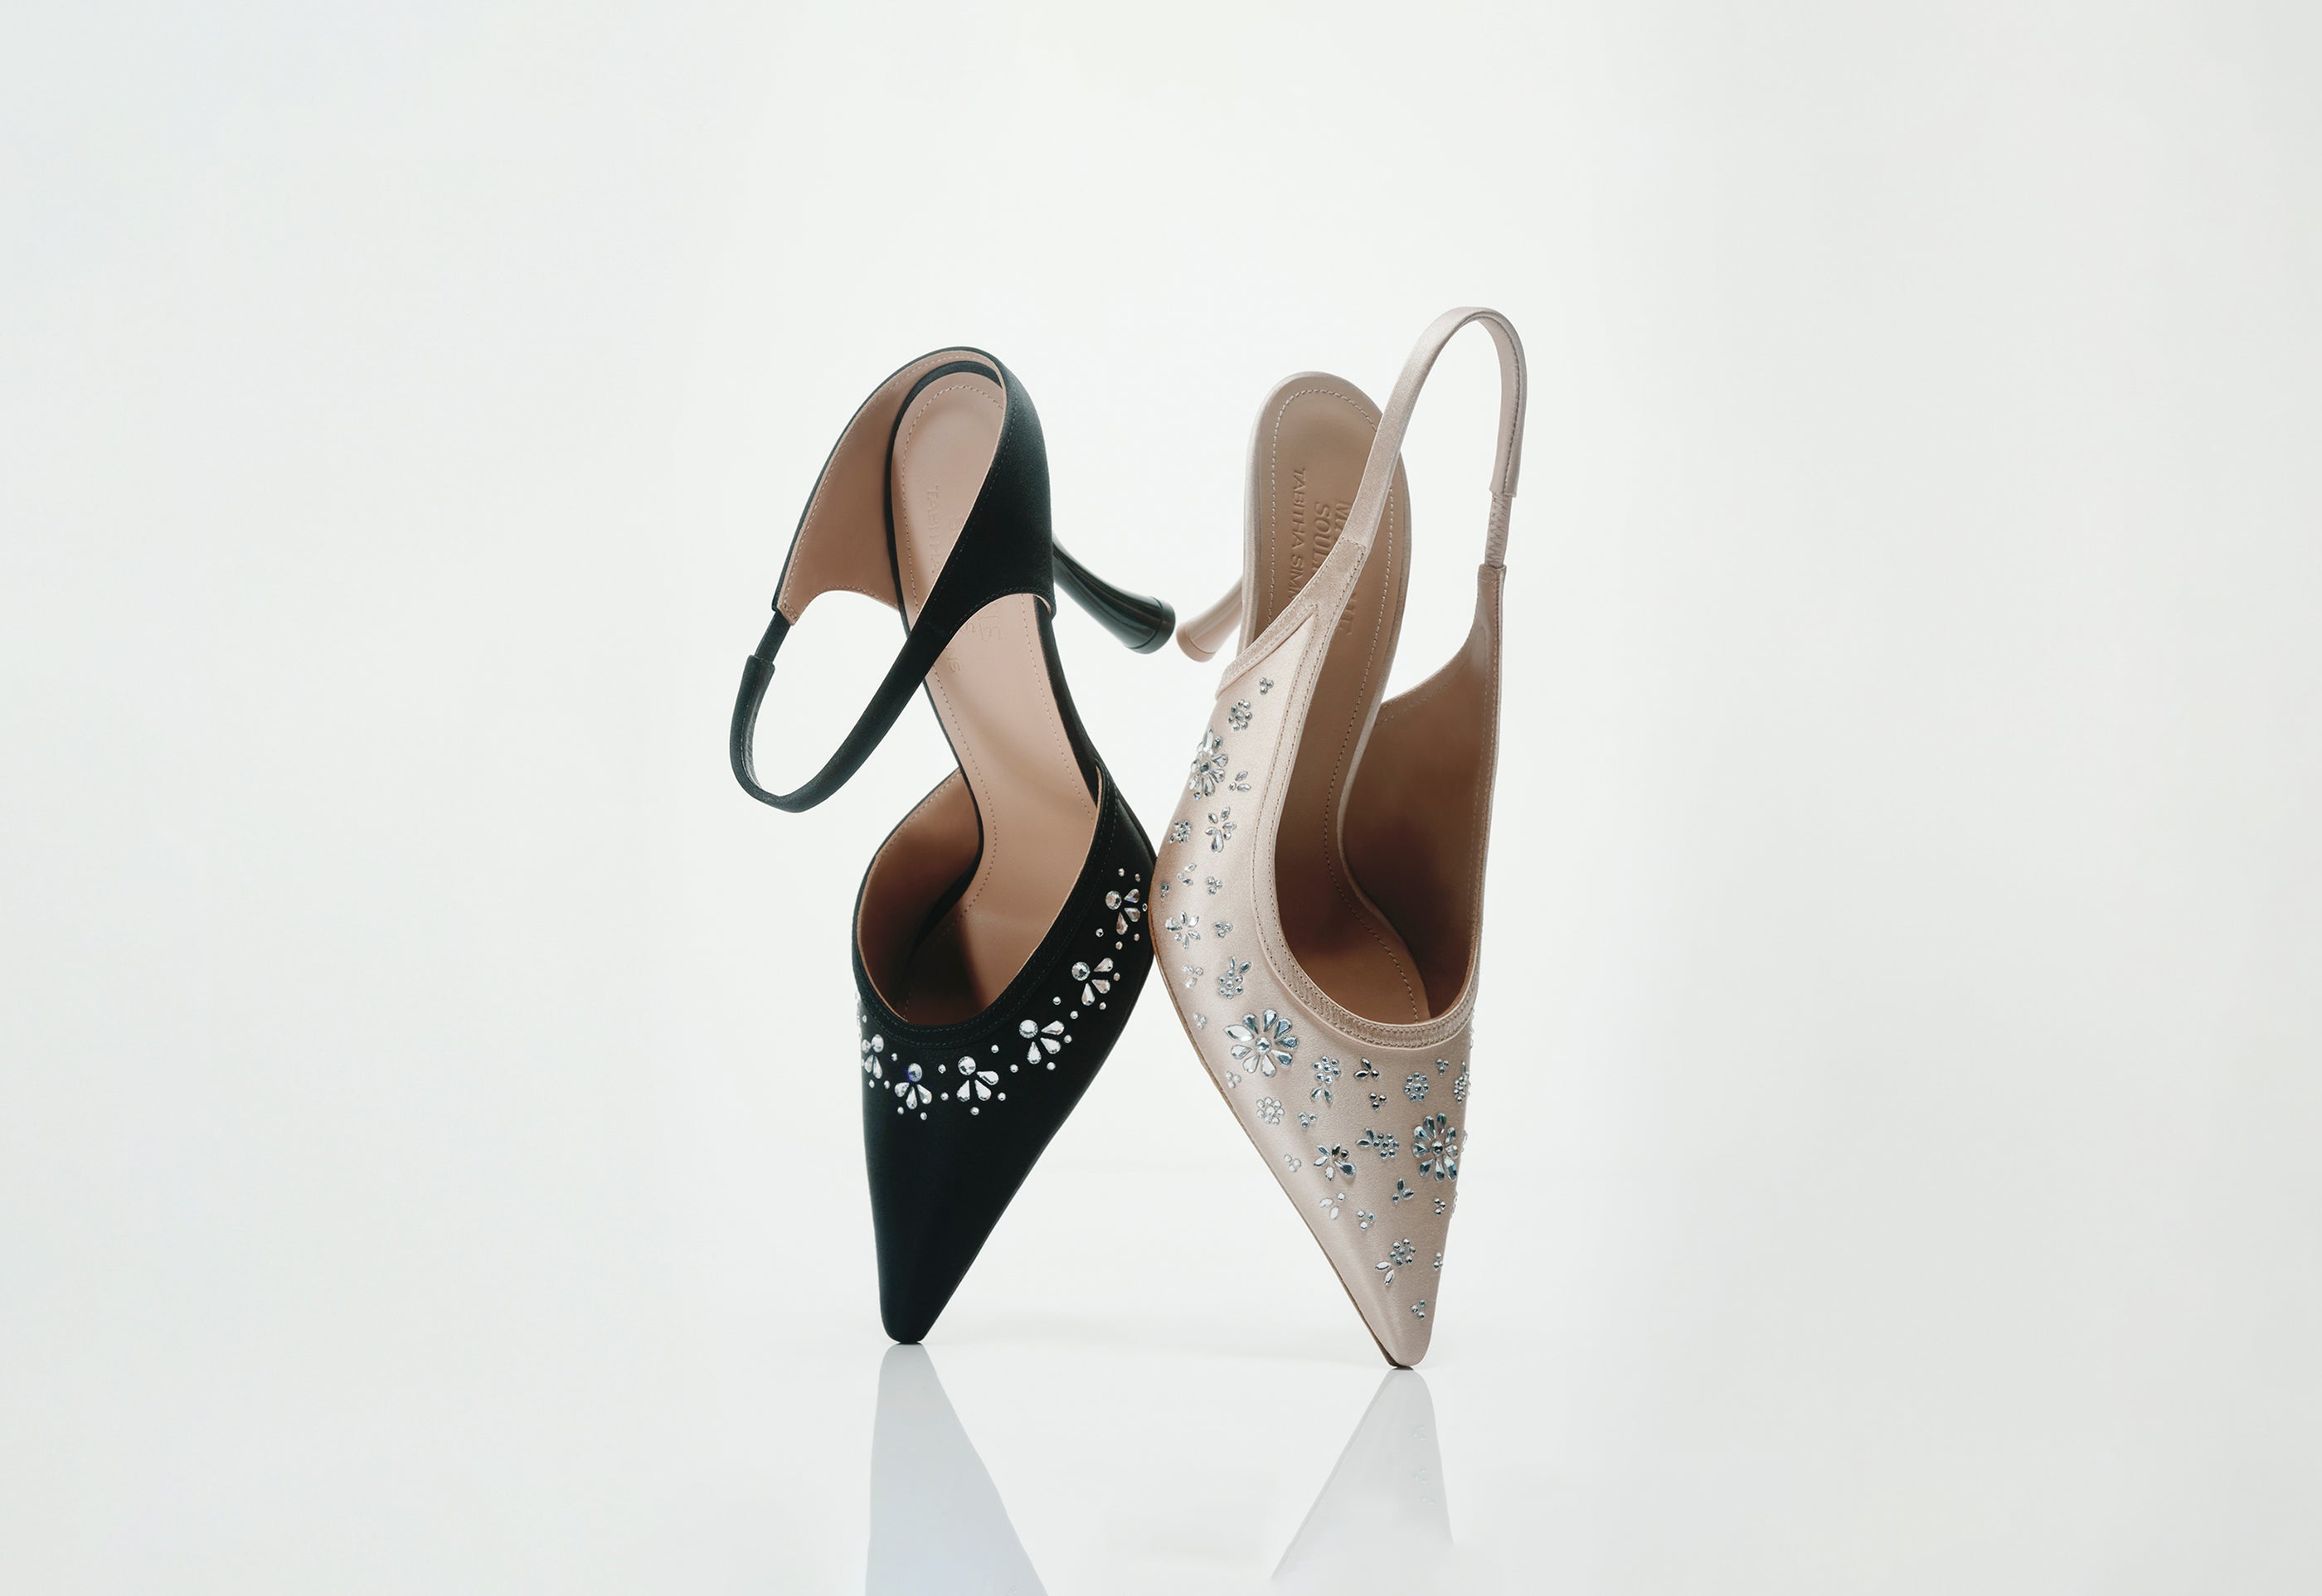 Malone Souliers x Tabitha Simmons Collaboration Satin Heeled Mule with Satin Heeled Slingback